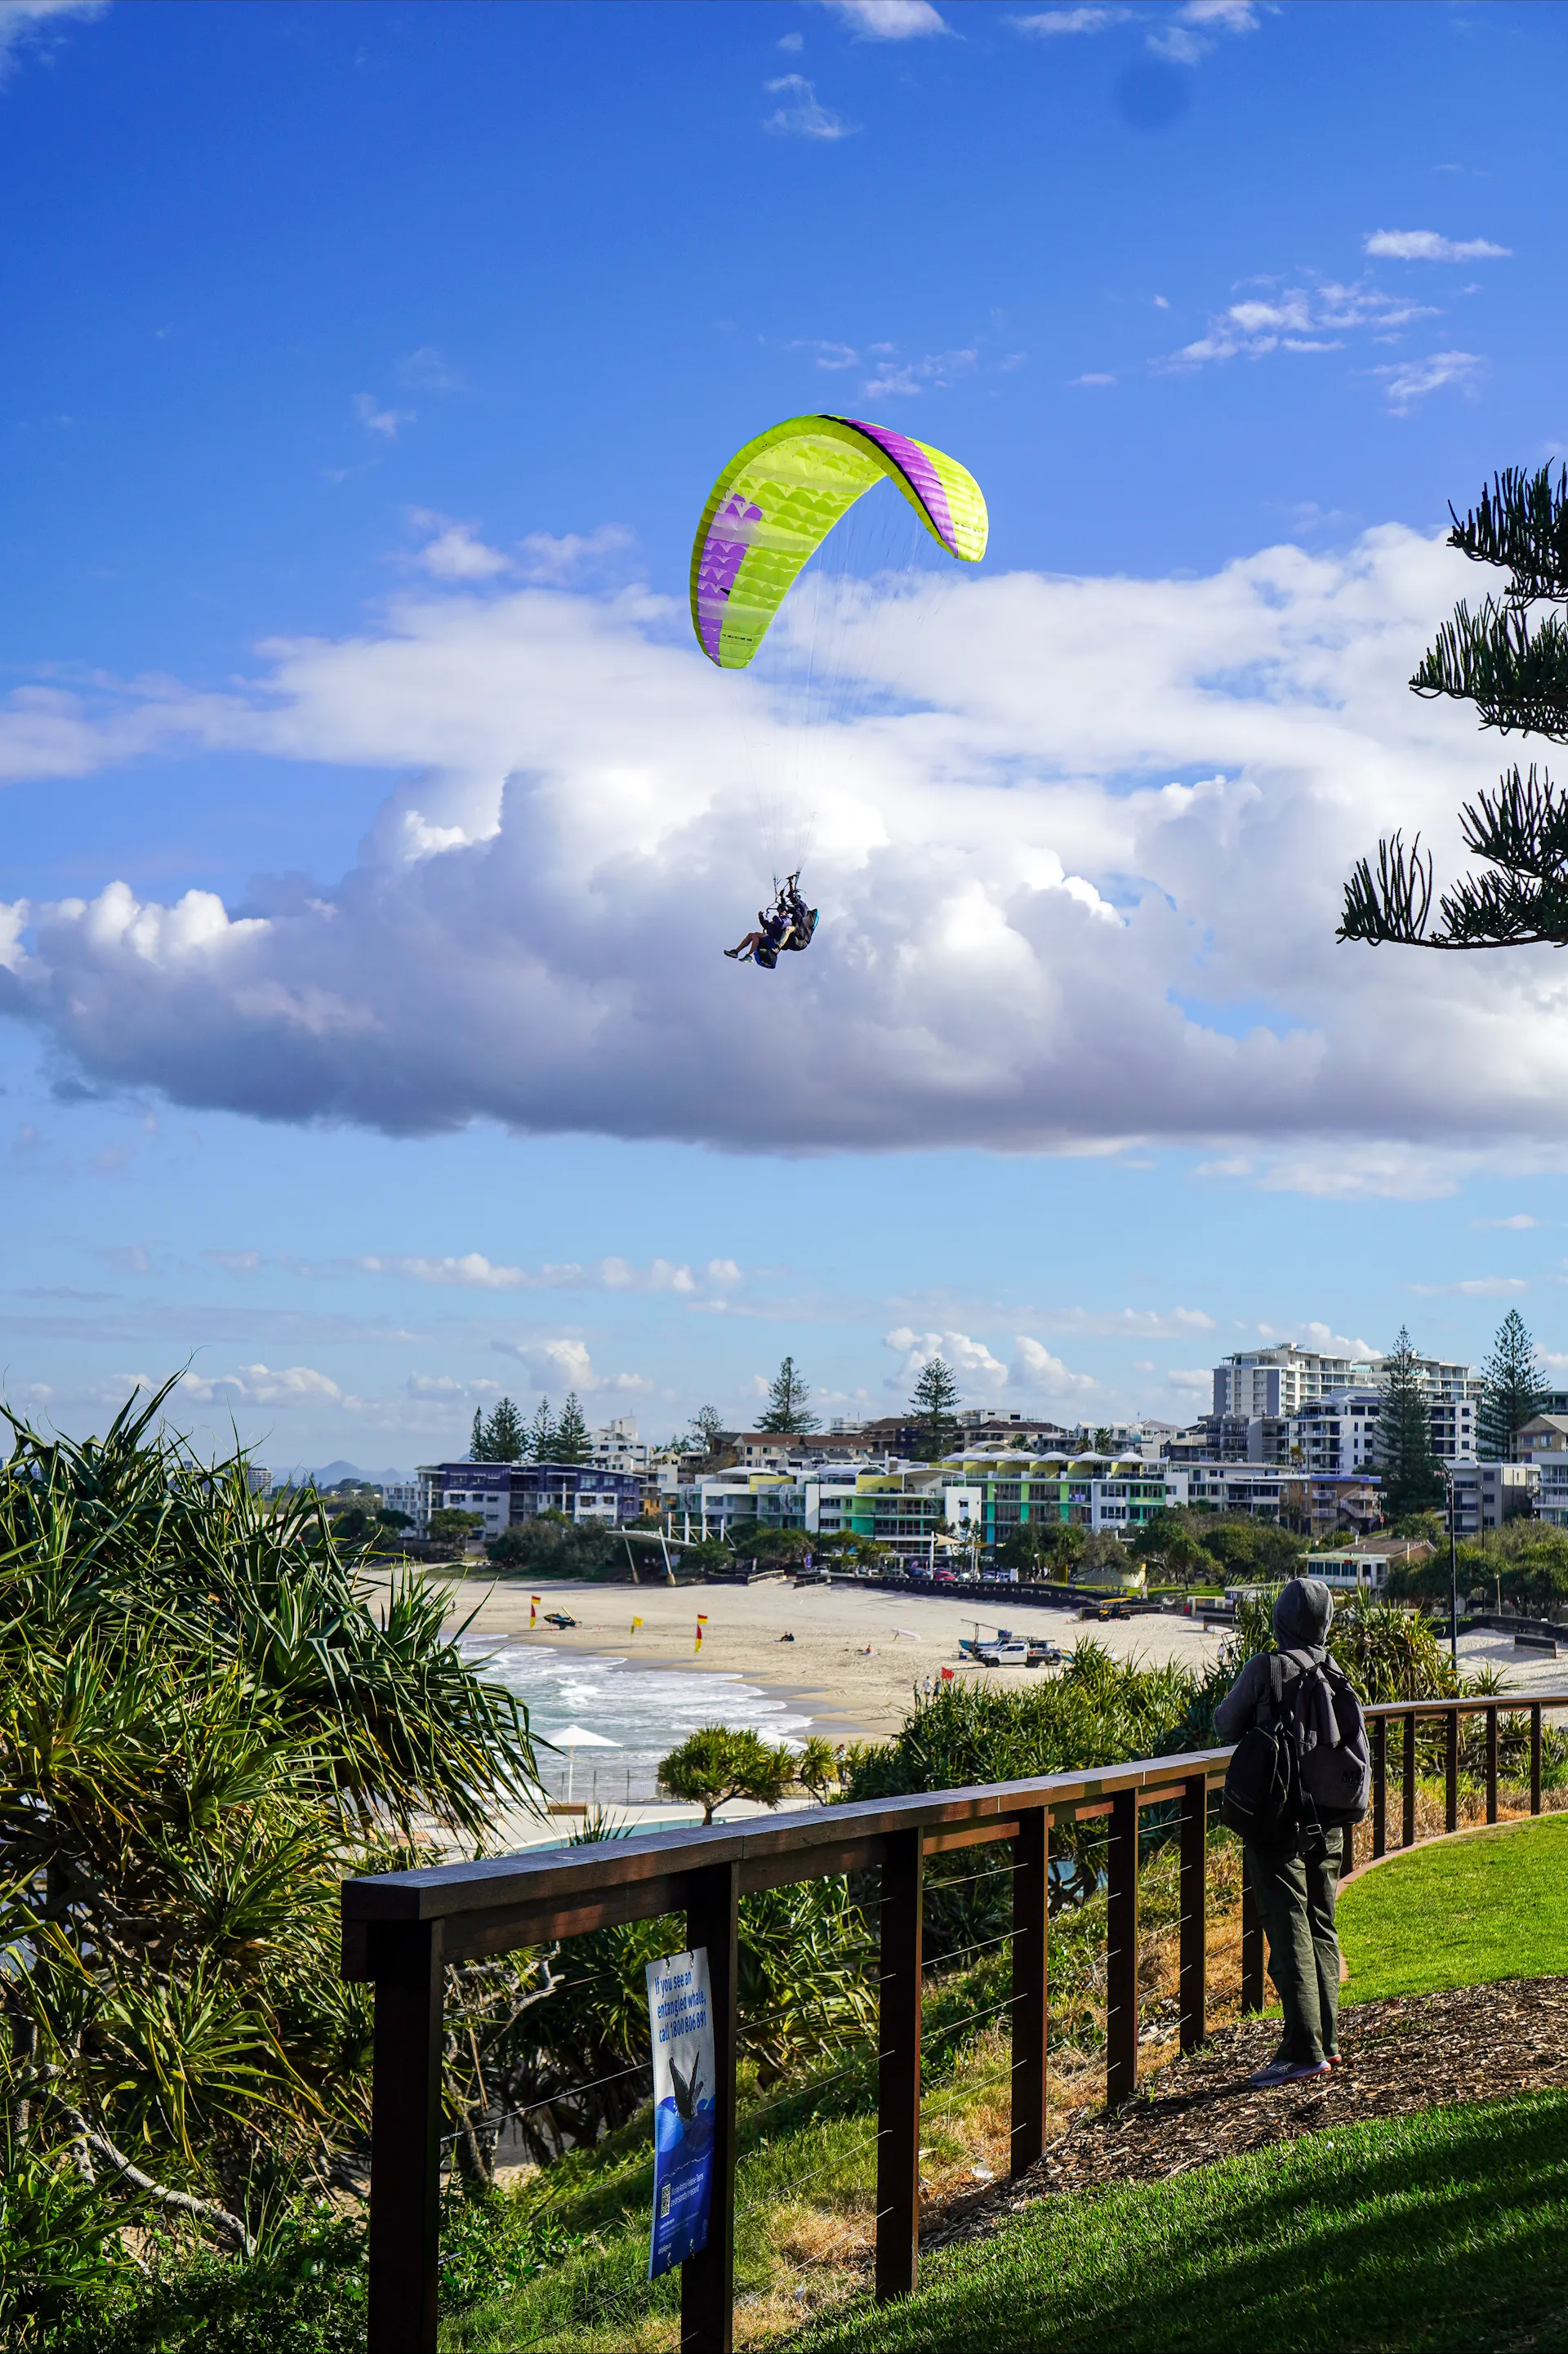 Tandem Paragliding over King's Beach!